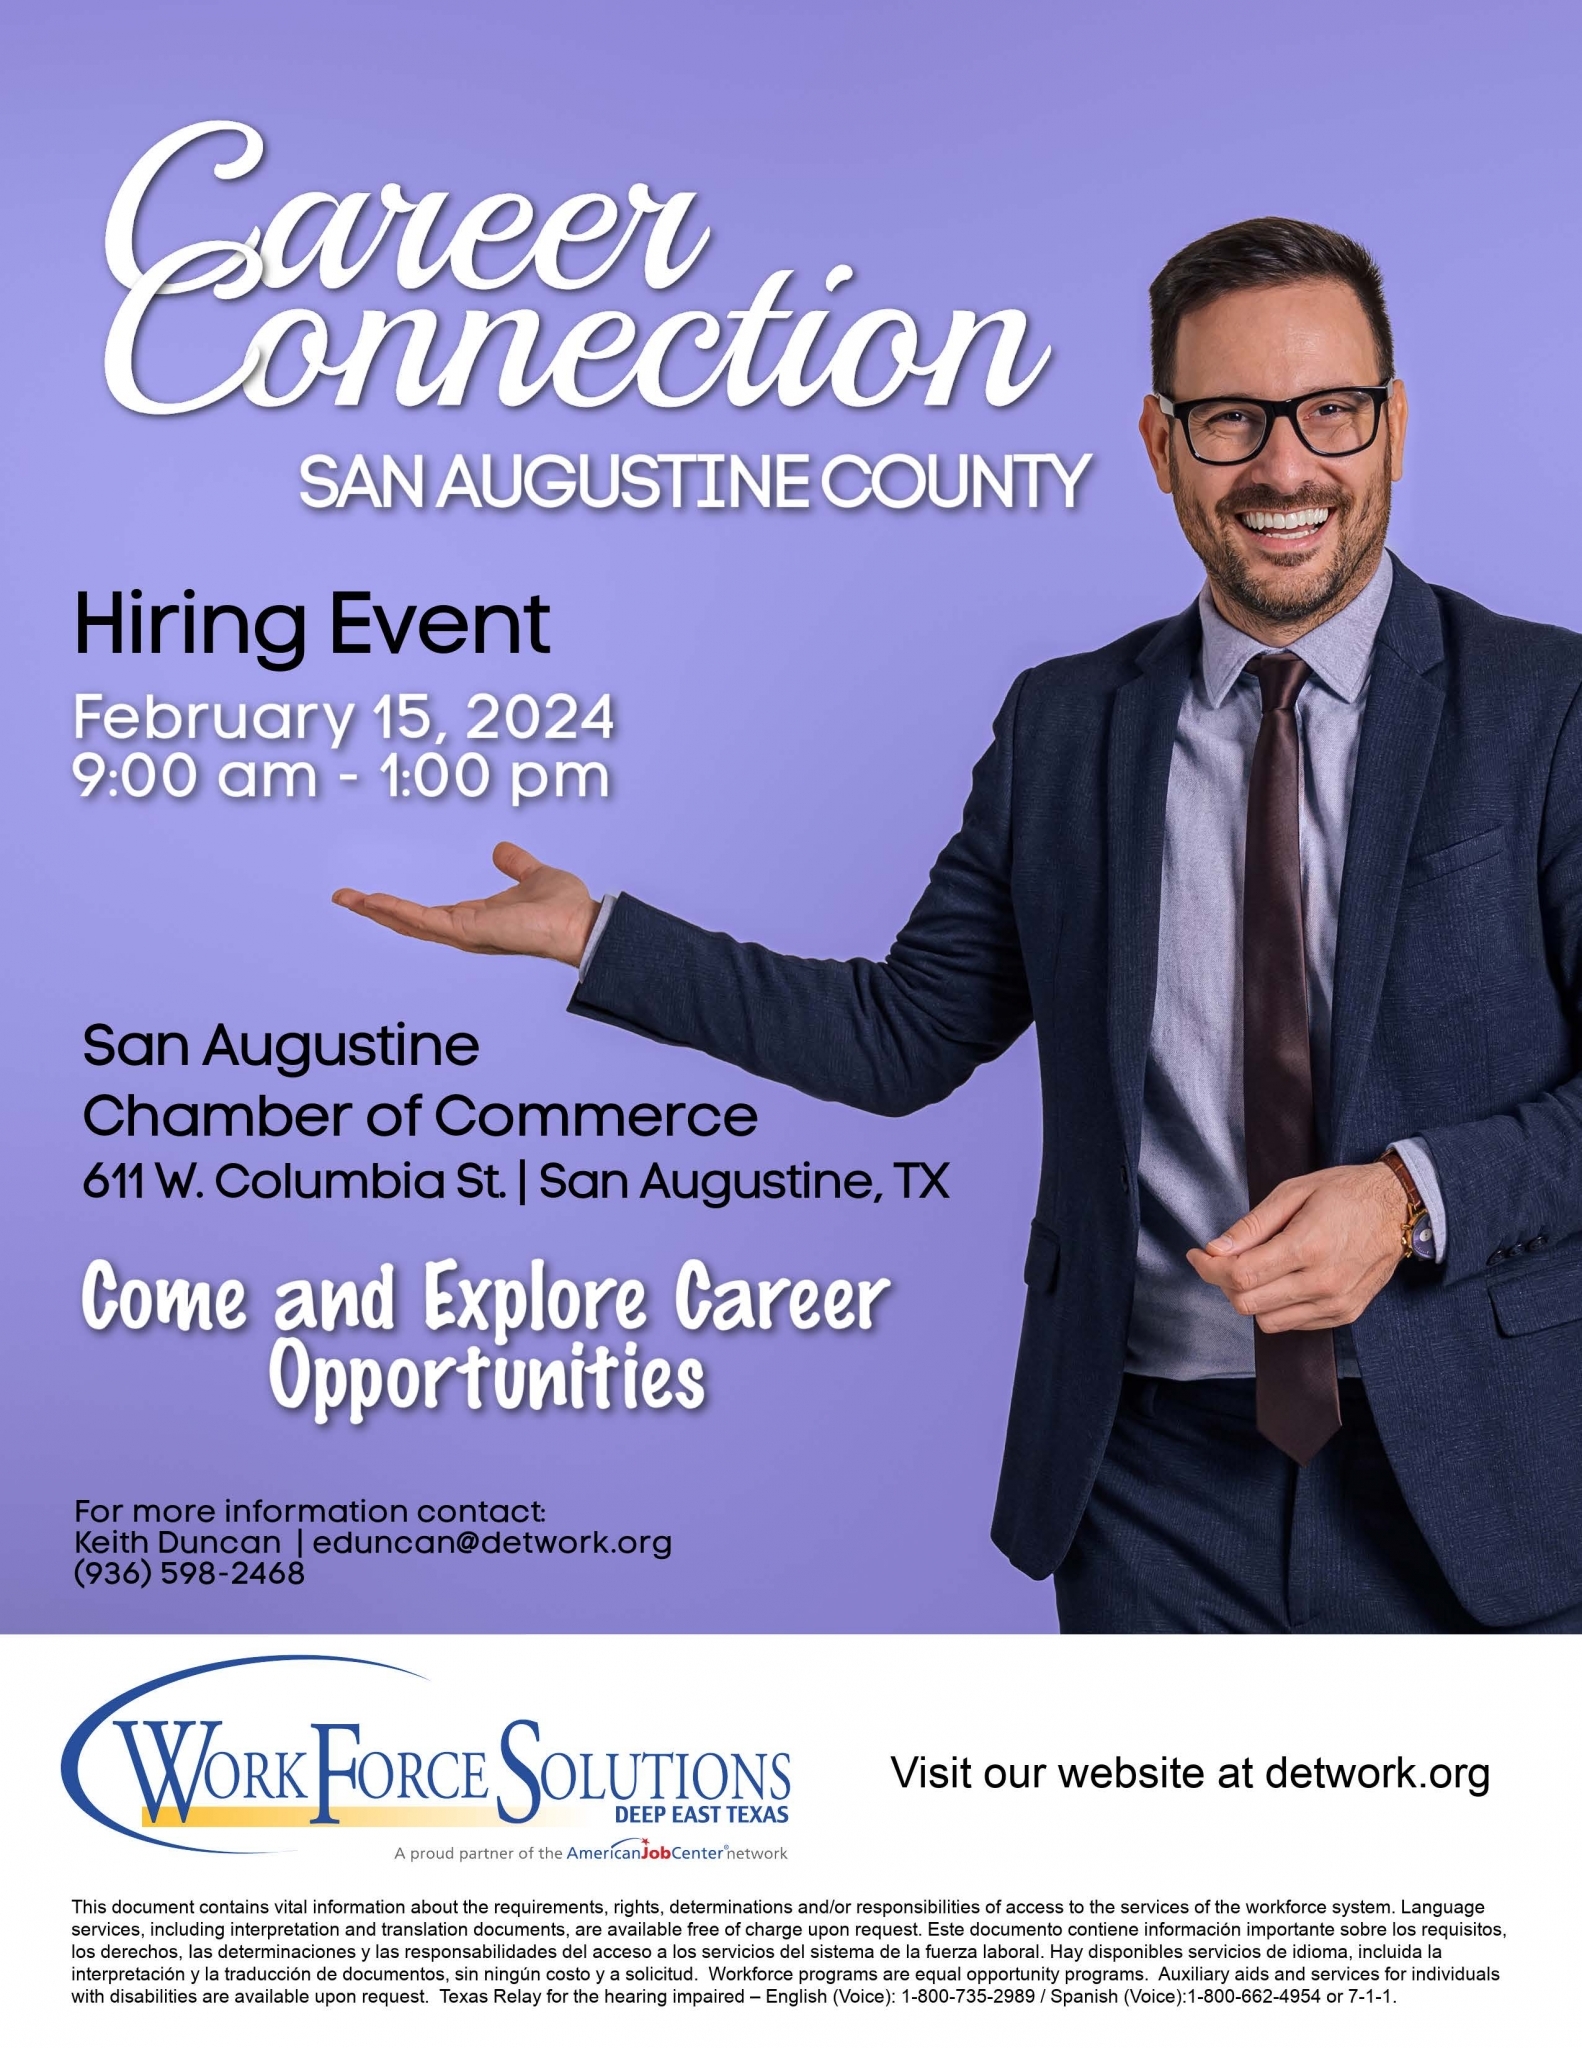 Career Connection in San Augustine County